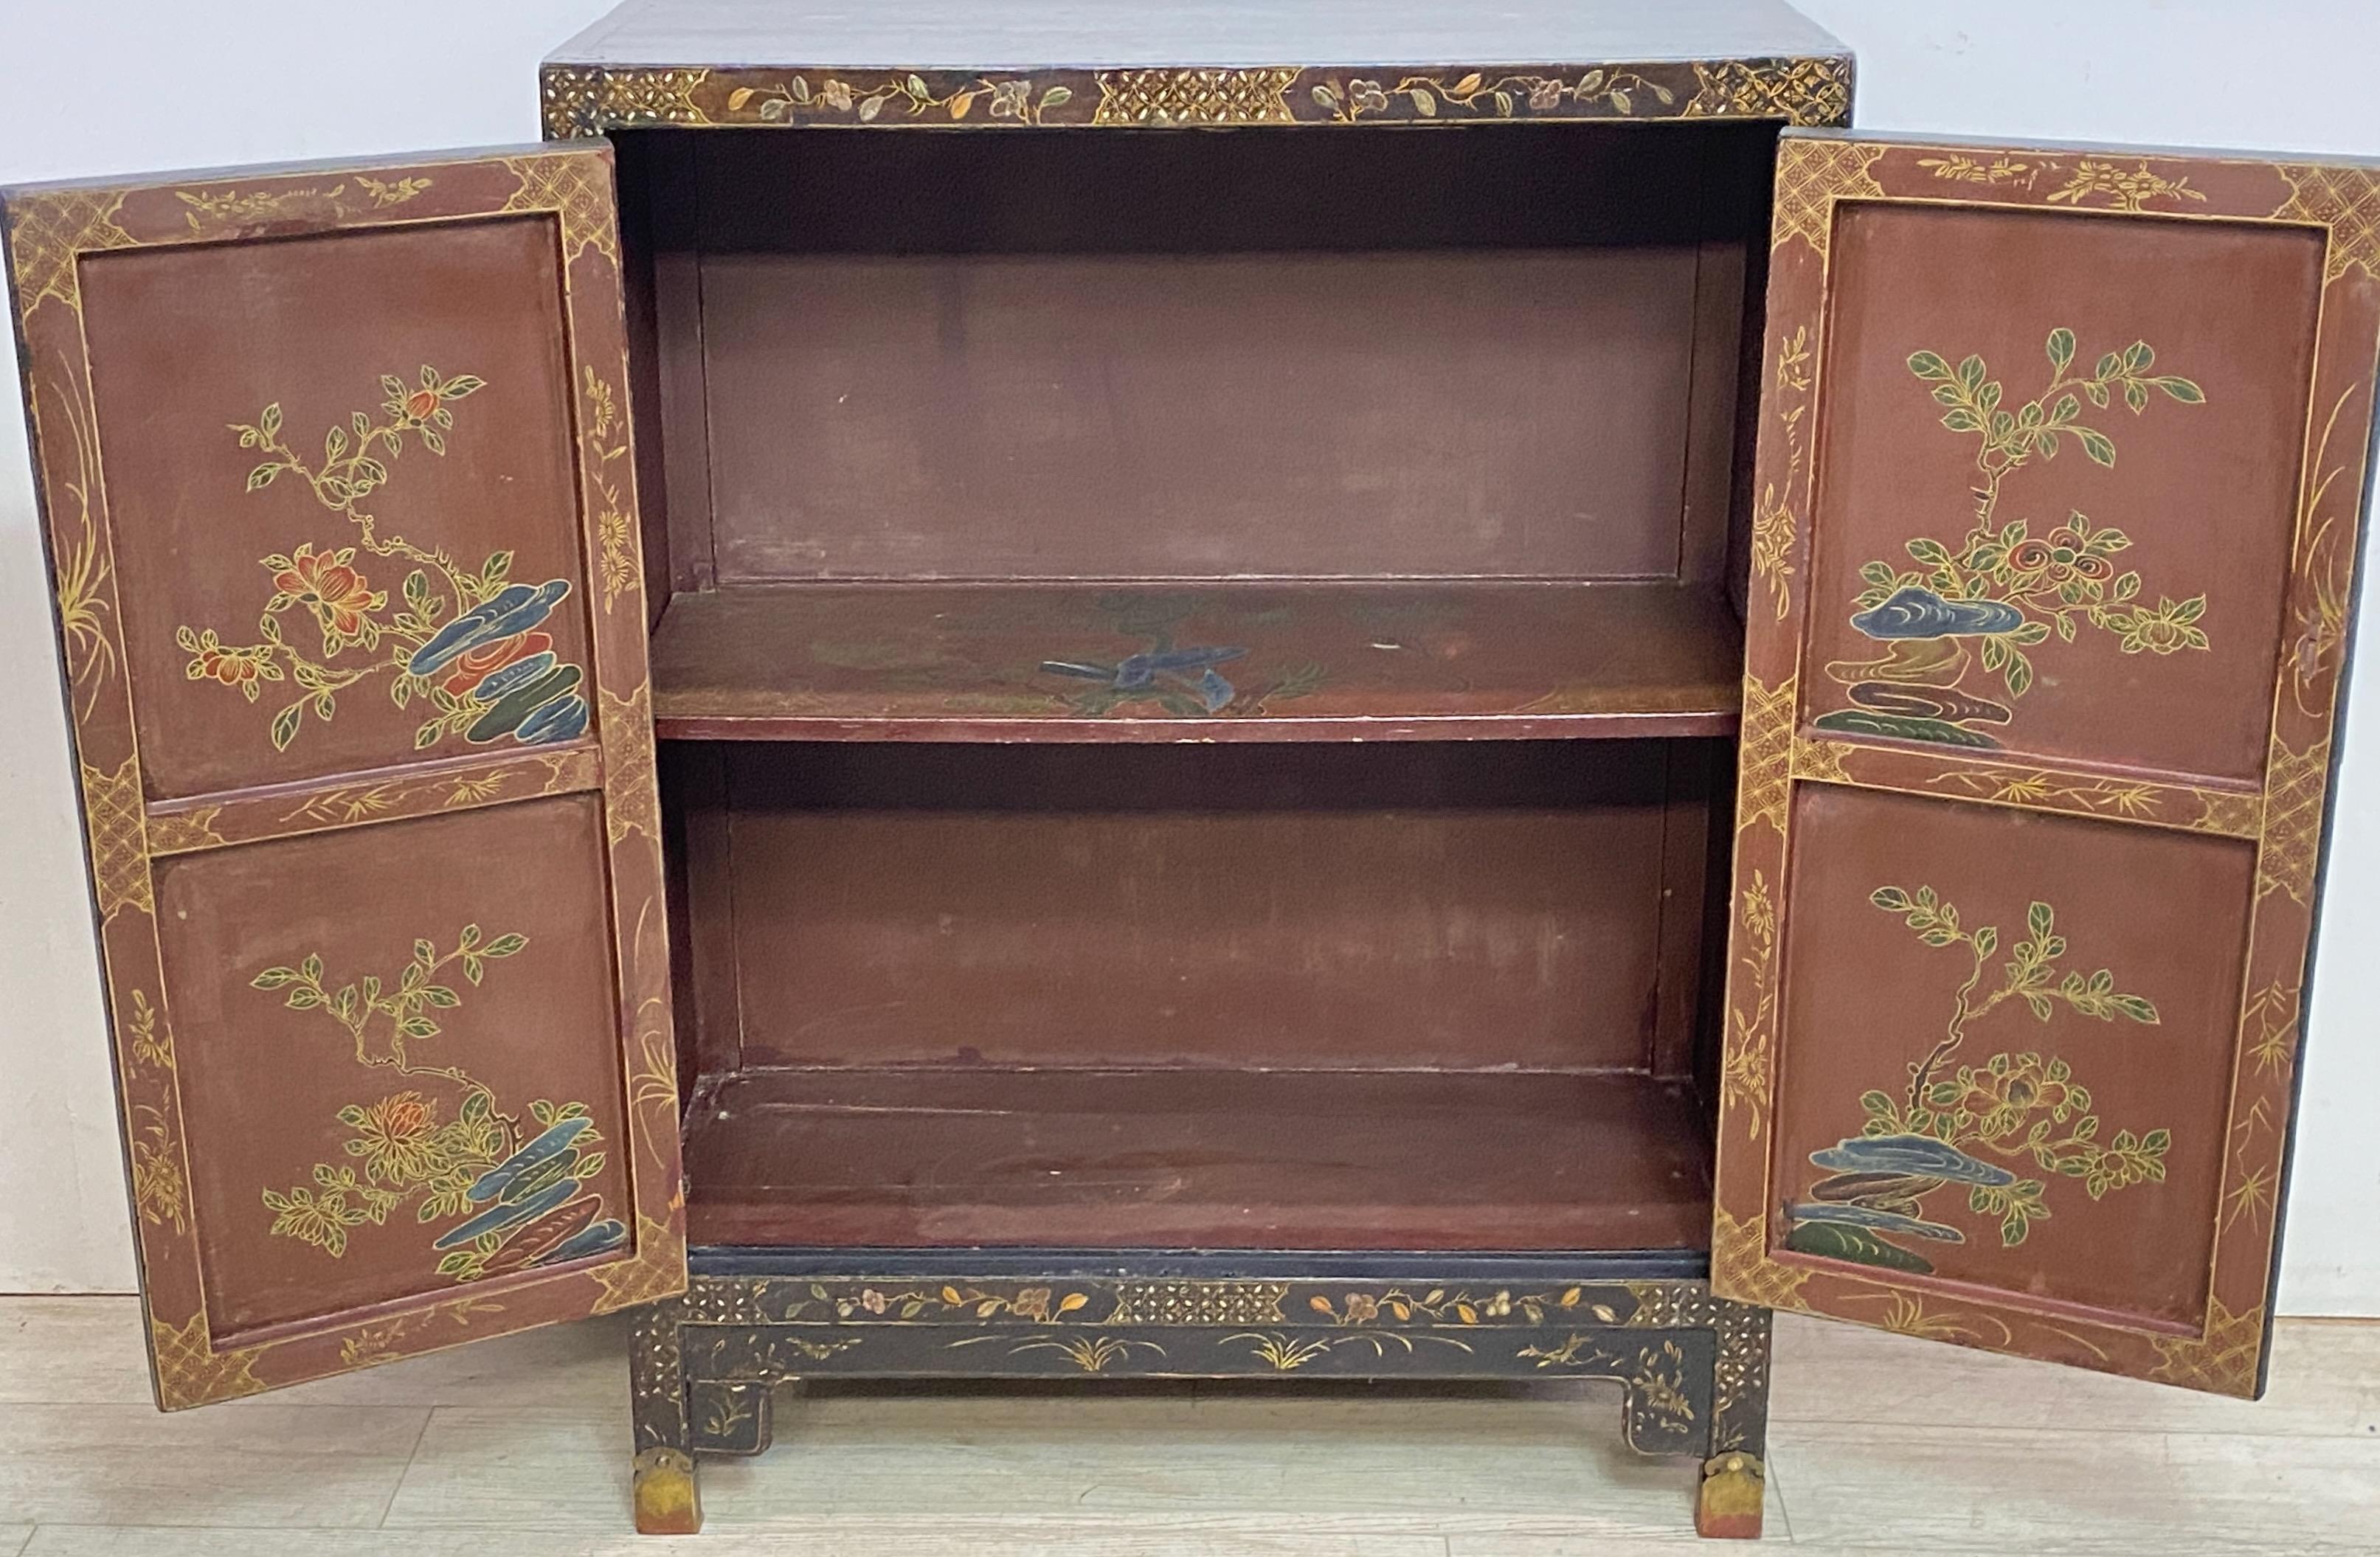  Pair of Chinese Laquer and Hardstone Cabinets, Late 19th - Early 20th Century For Sale 3